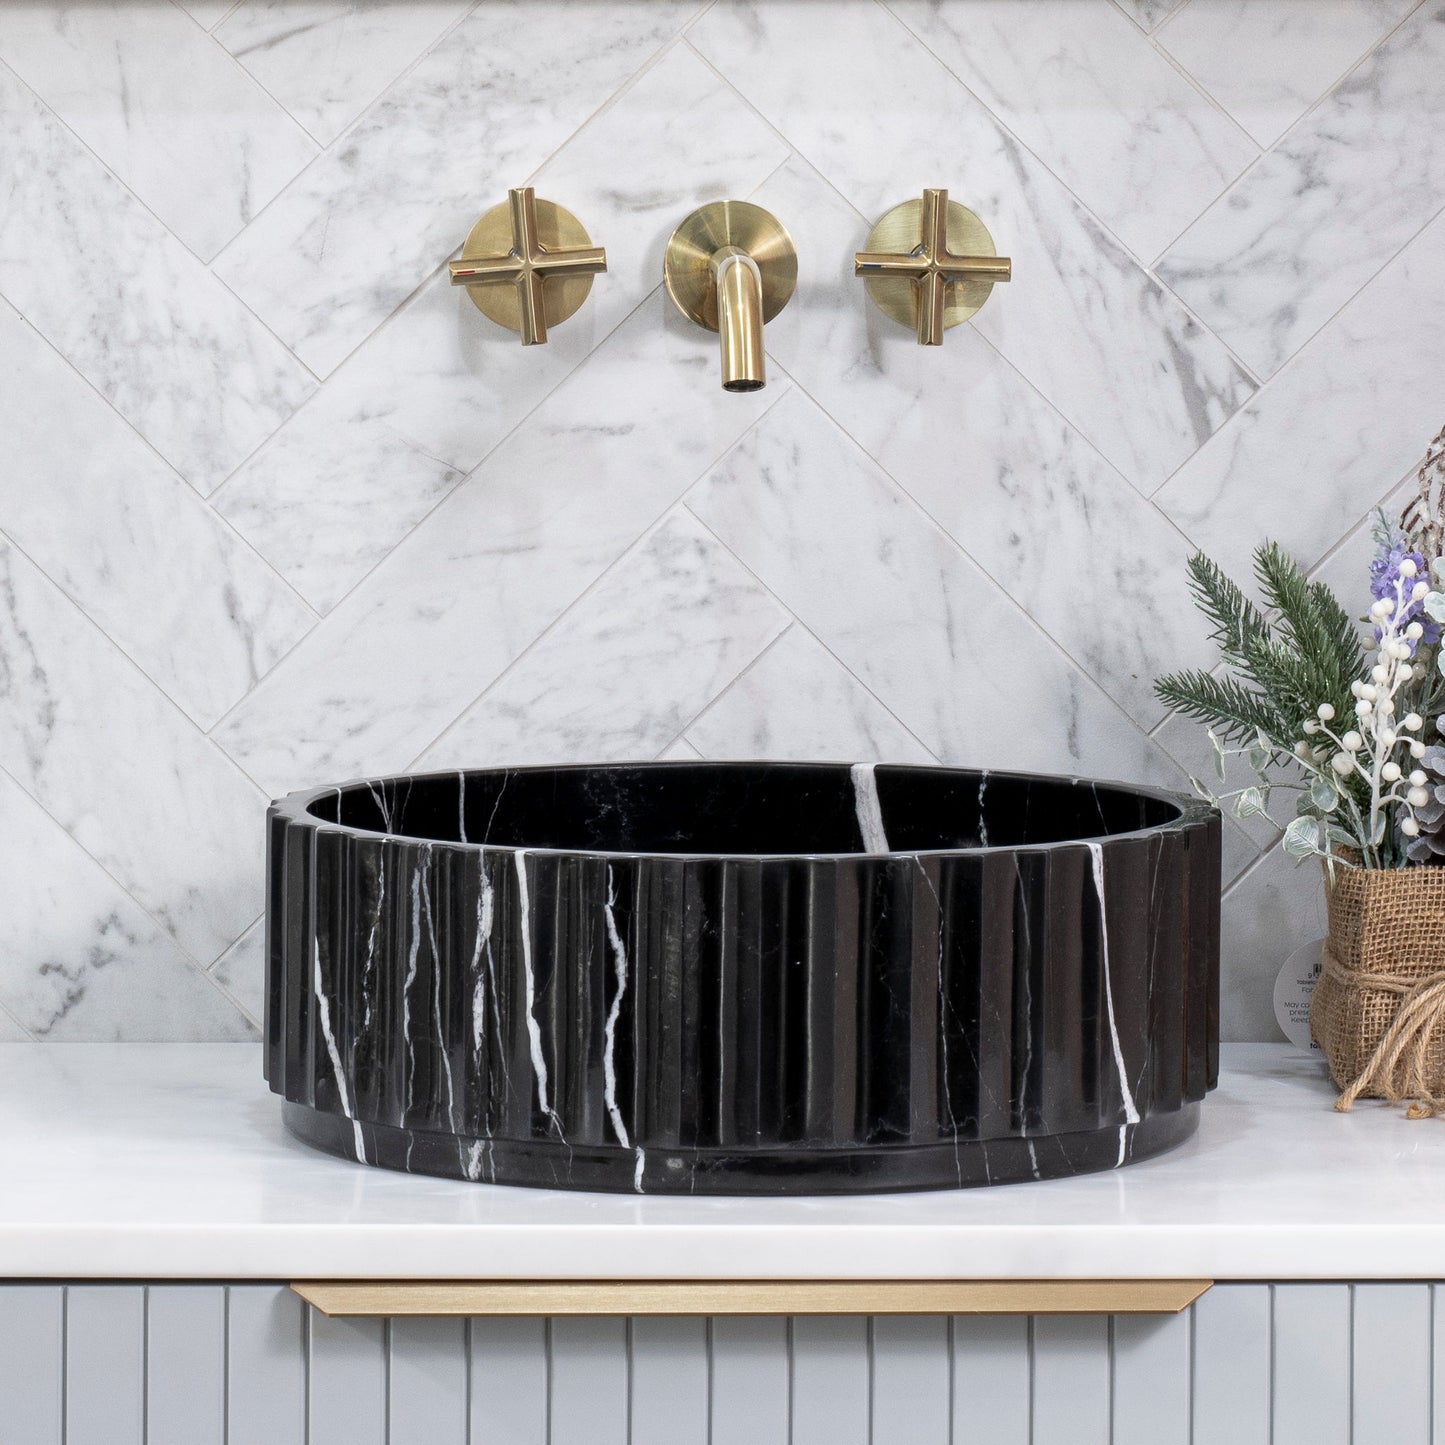 Kyklos Groove Round Fluted 395mm Above-Counter Marble Basin, Honed Nero Marquina